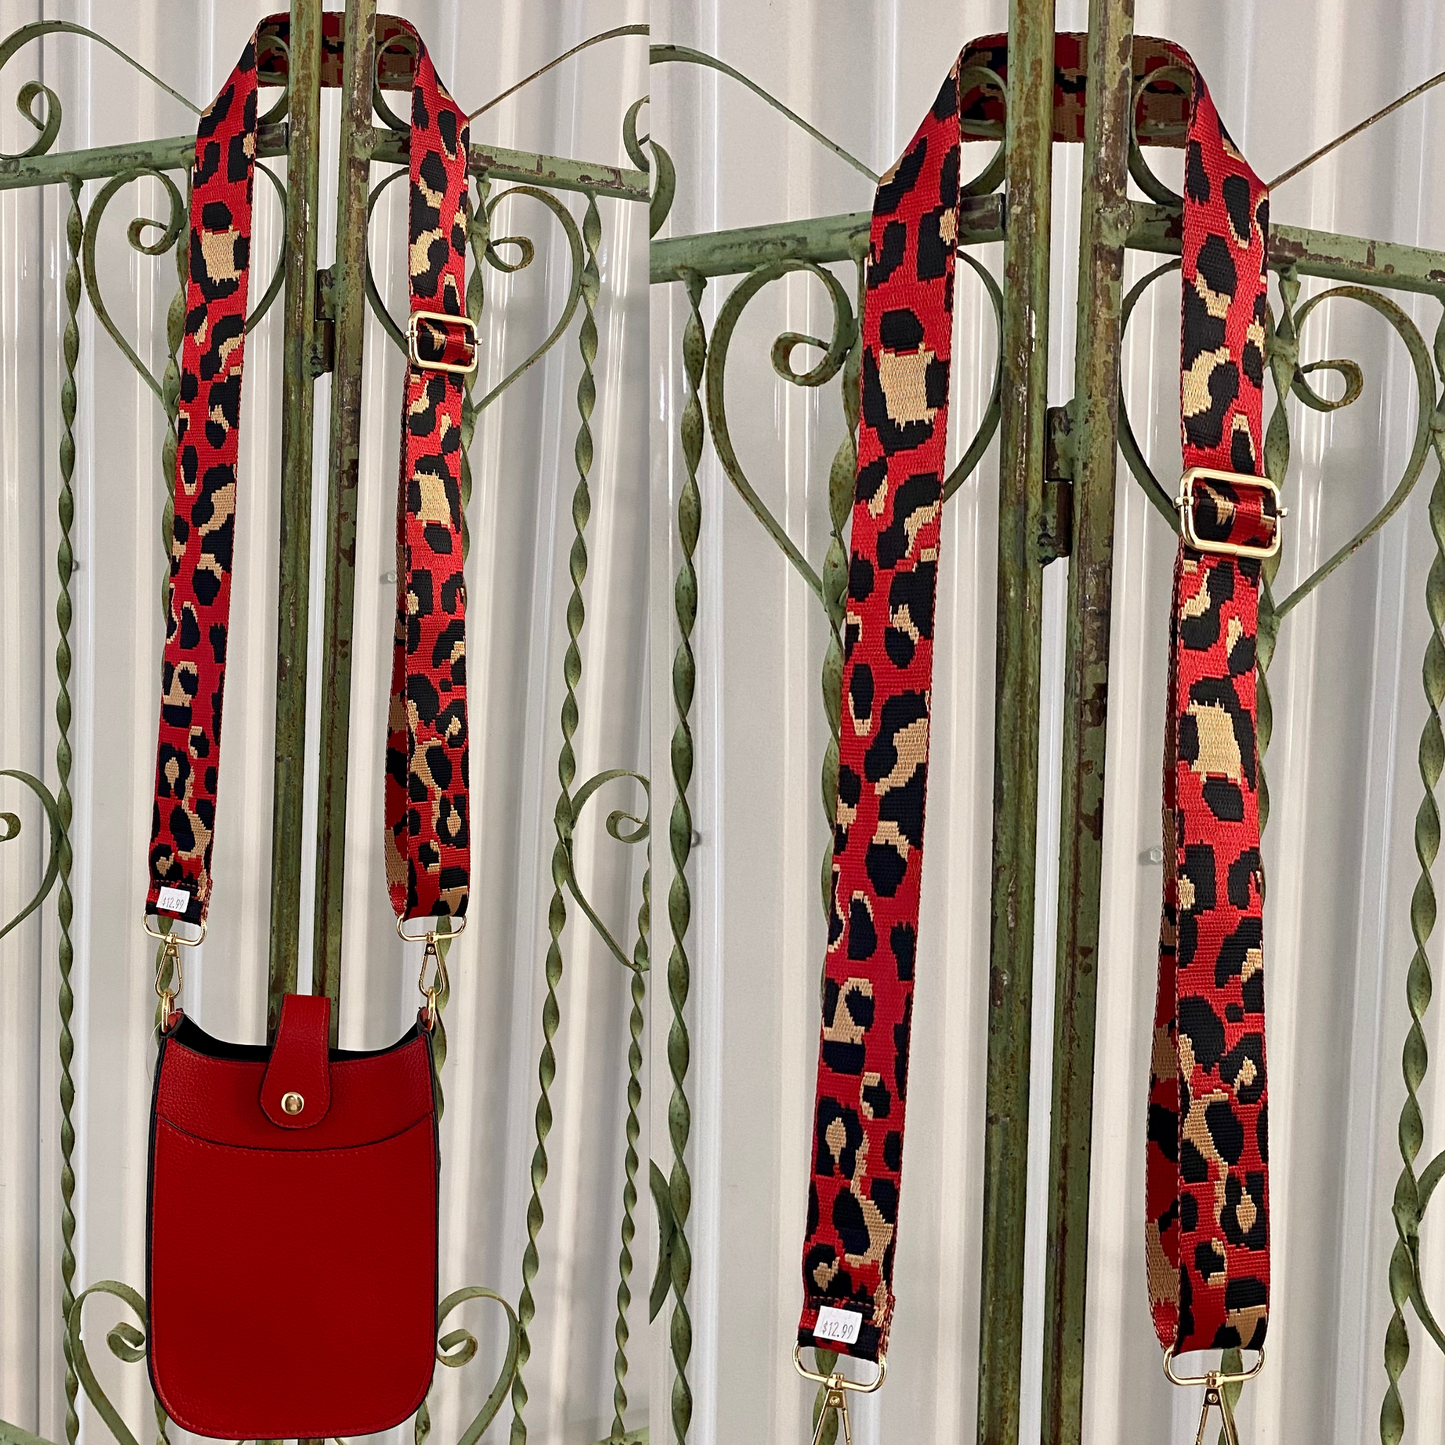 The Red Cheetah Adjustable Purse Strap Change the look of any purse! These stylish guitar style strap adds a pop of color and fashion to any bag, big or small. Adjustable down to 29 inches for a belt bag, or 52 inches at its longest length for a crossbody strap. The newest trend in handbags, at a fraction of the designer price!